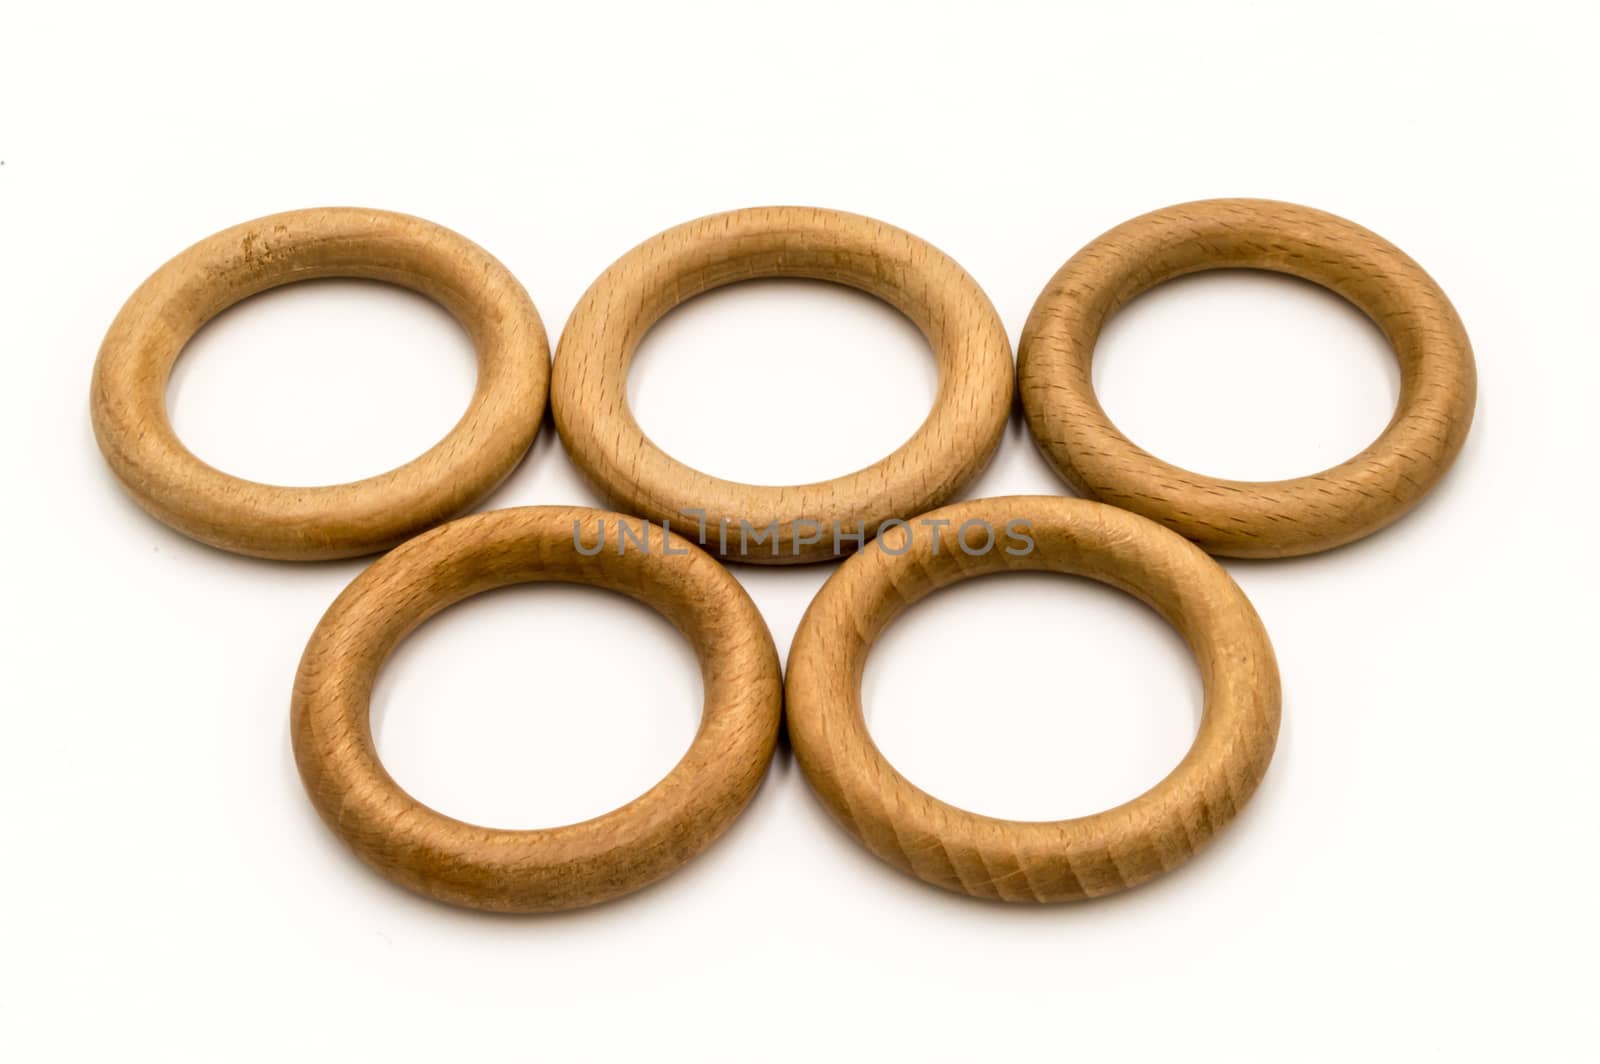 olympic ring in wooden circle on a white background